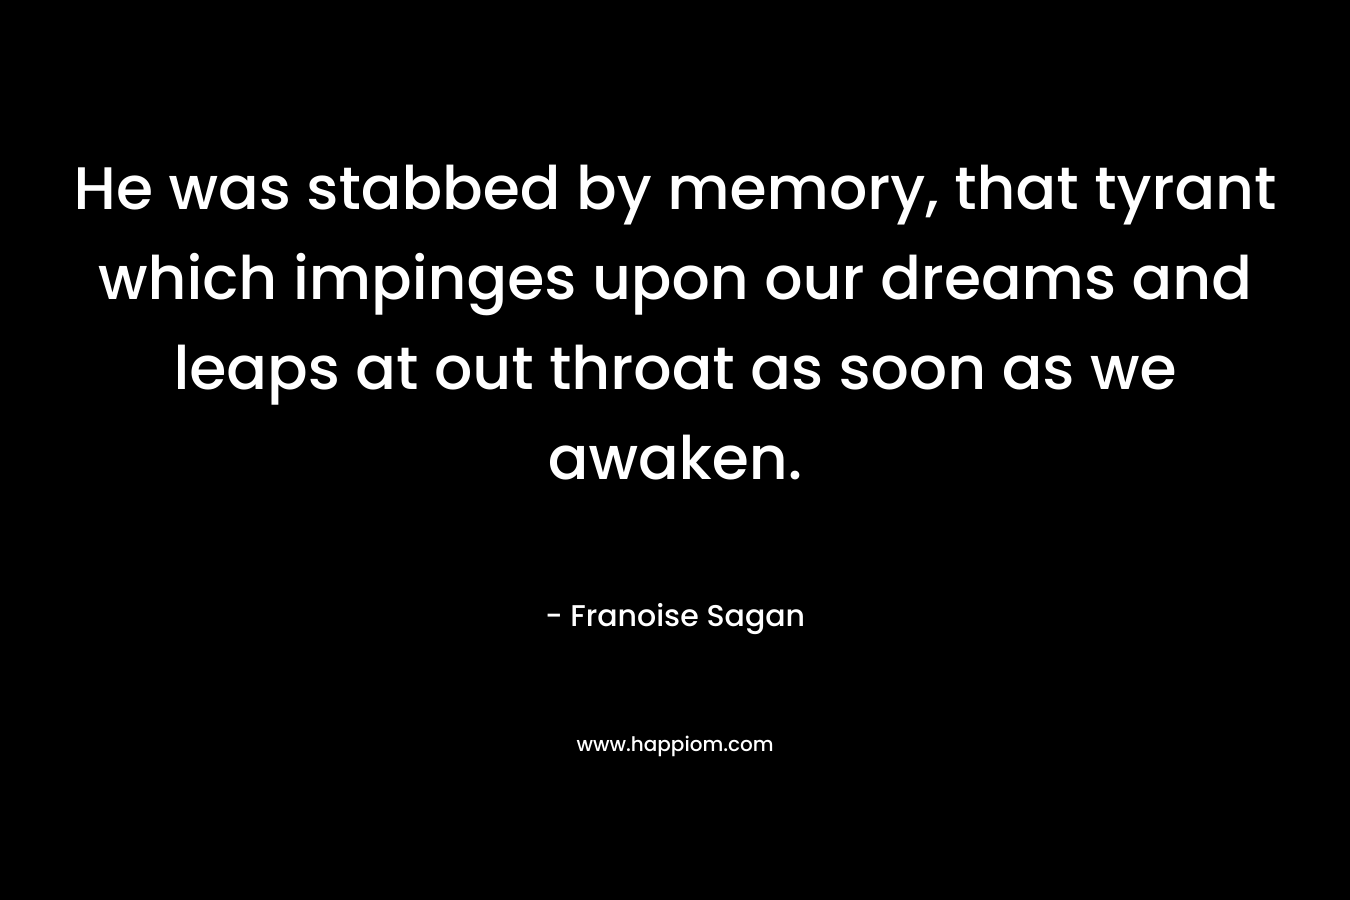 He was stabbed by memory, that tyrant which impinges upon our dreams and leaps at out throat as soon as we awaken. – Franoise Sagan